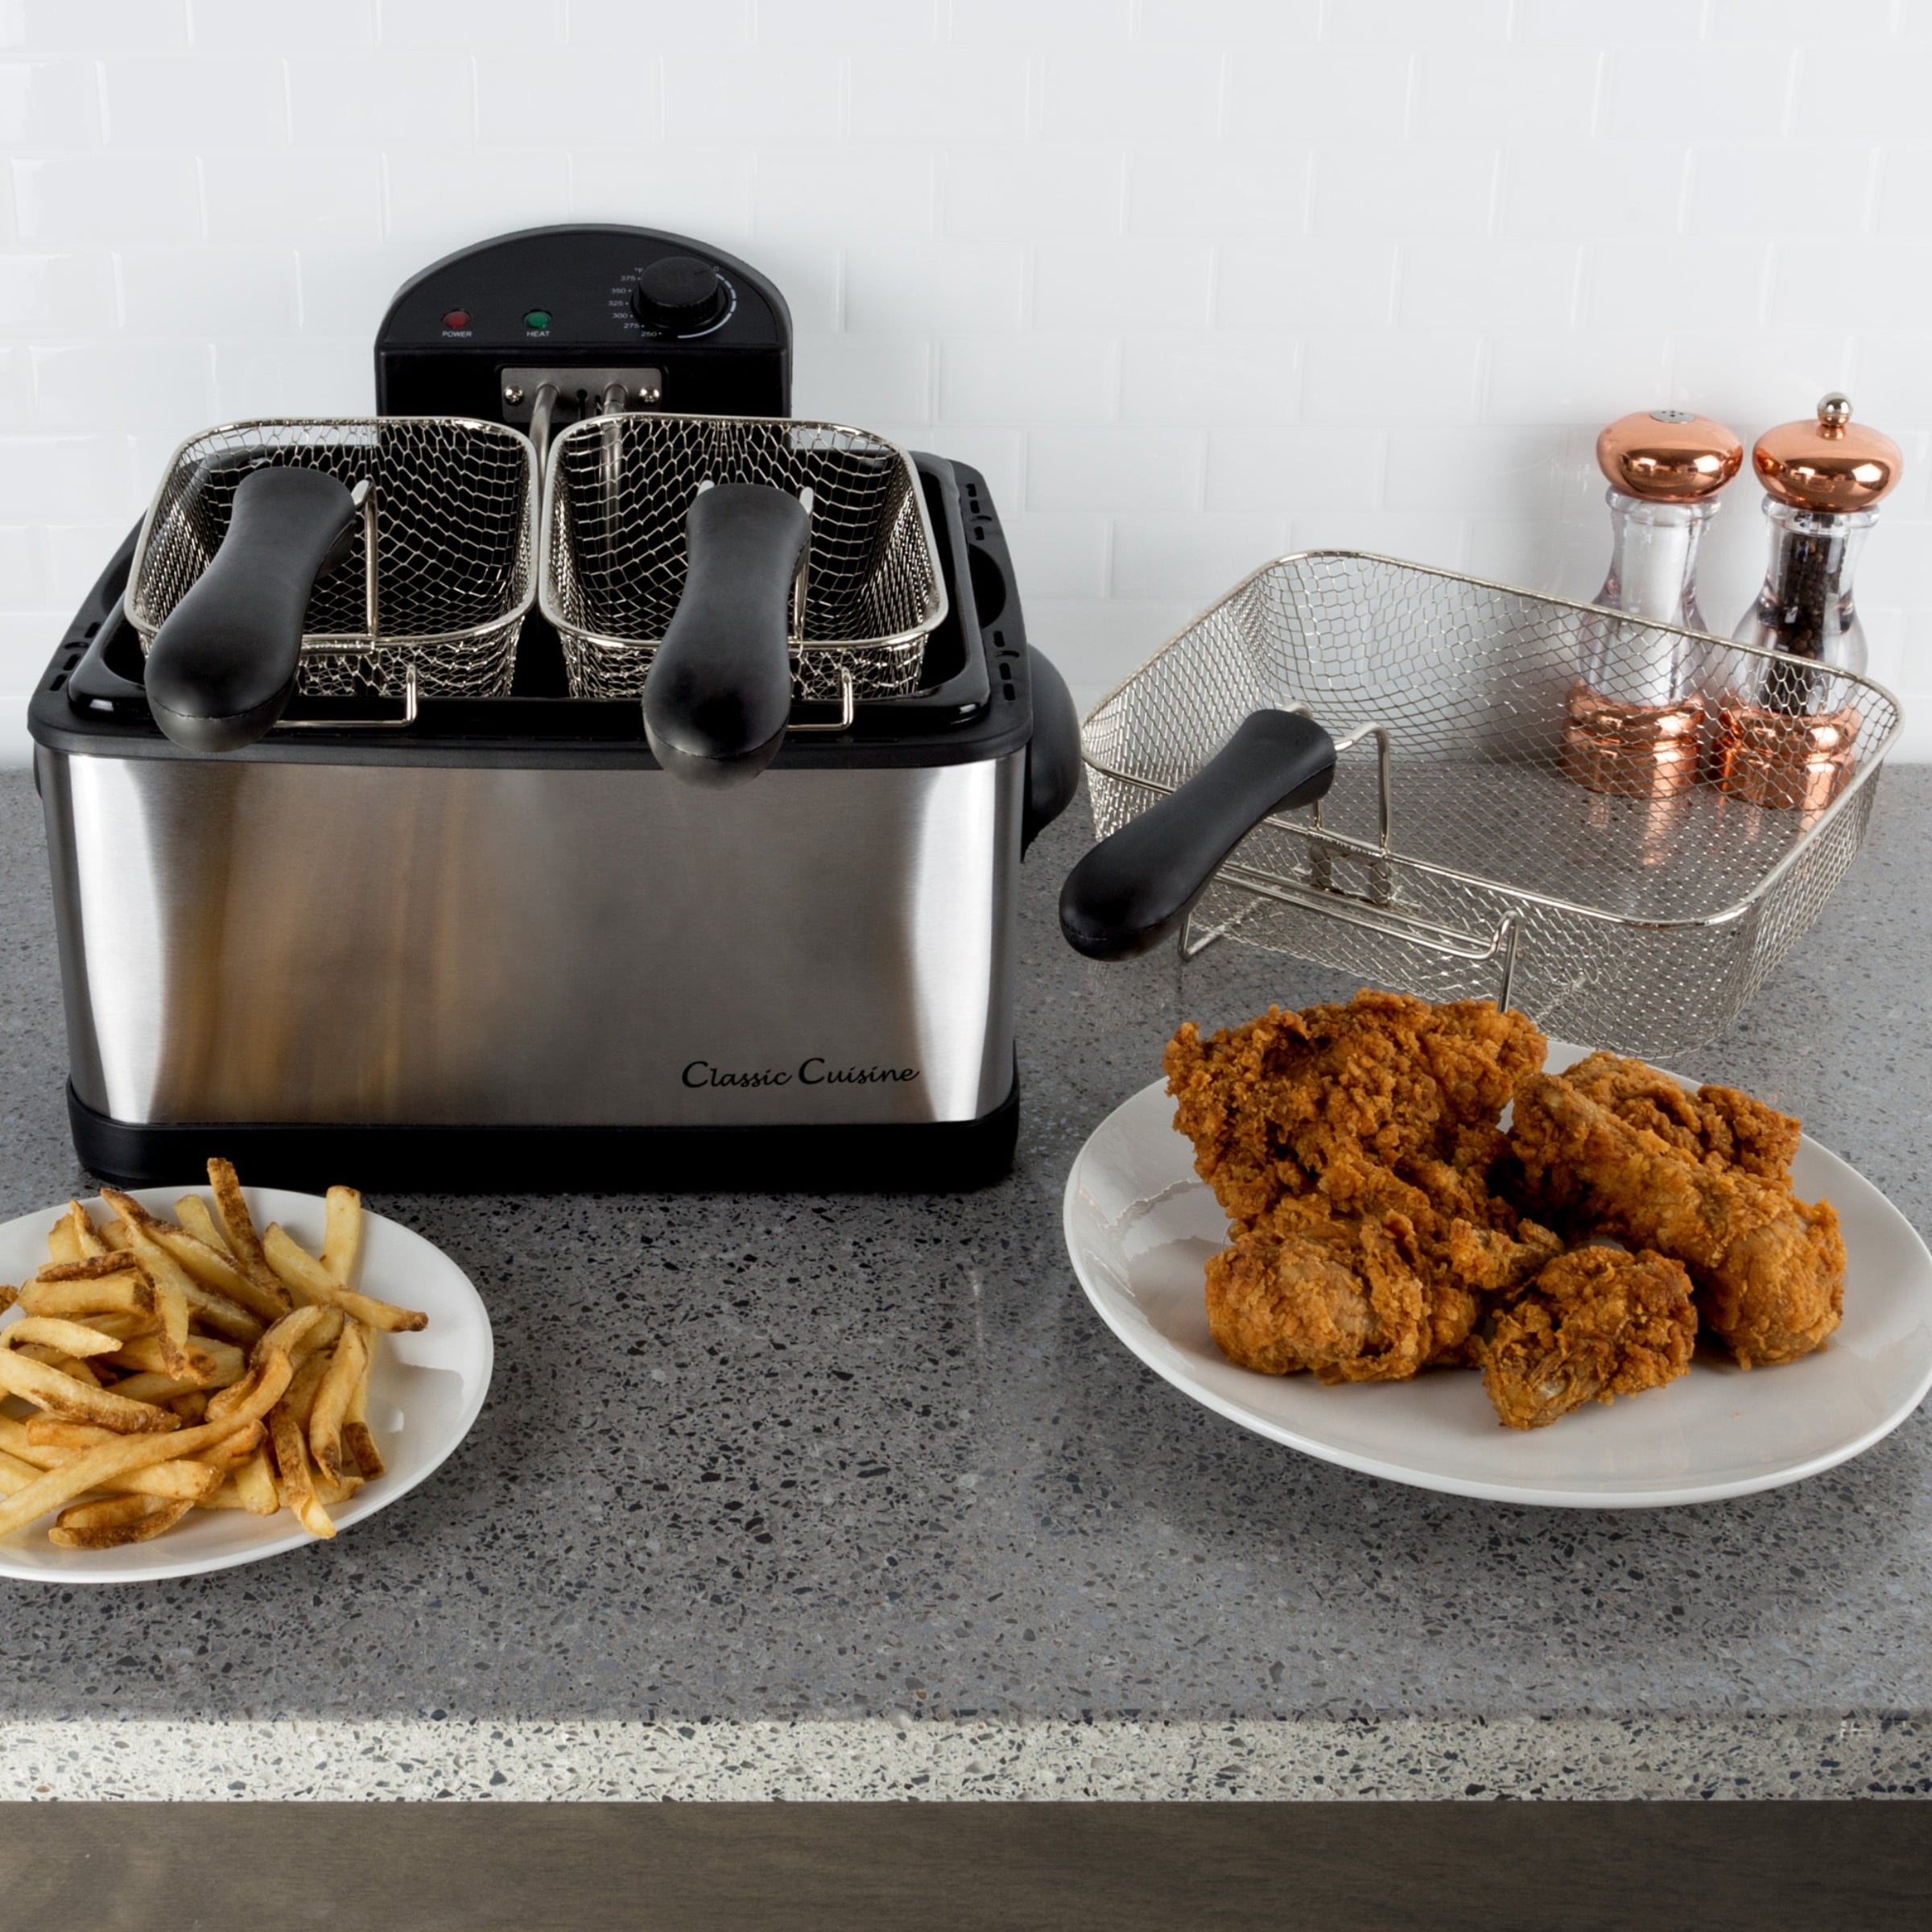 https://ak1.ostkcdn.com/images/products/is/images/direct/517d9f39d3021f0746ee954f111960932e3d212b/Deep-Fryer---4-Liter-Electric-Oil-Fryer---1-Large-Basket-and-2-Small-for-Dual-Use-by-Classic-Cuisine.jpg